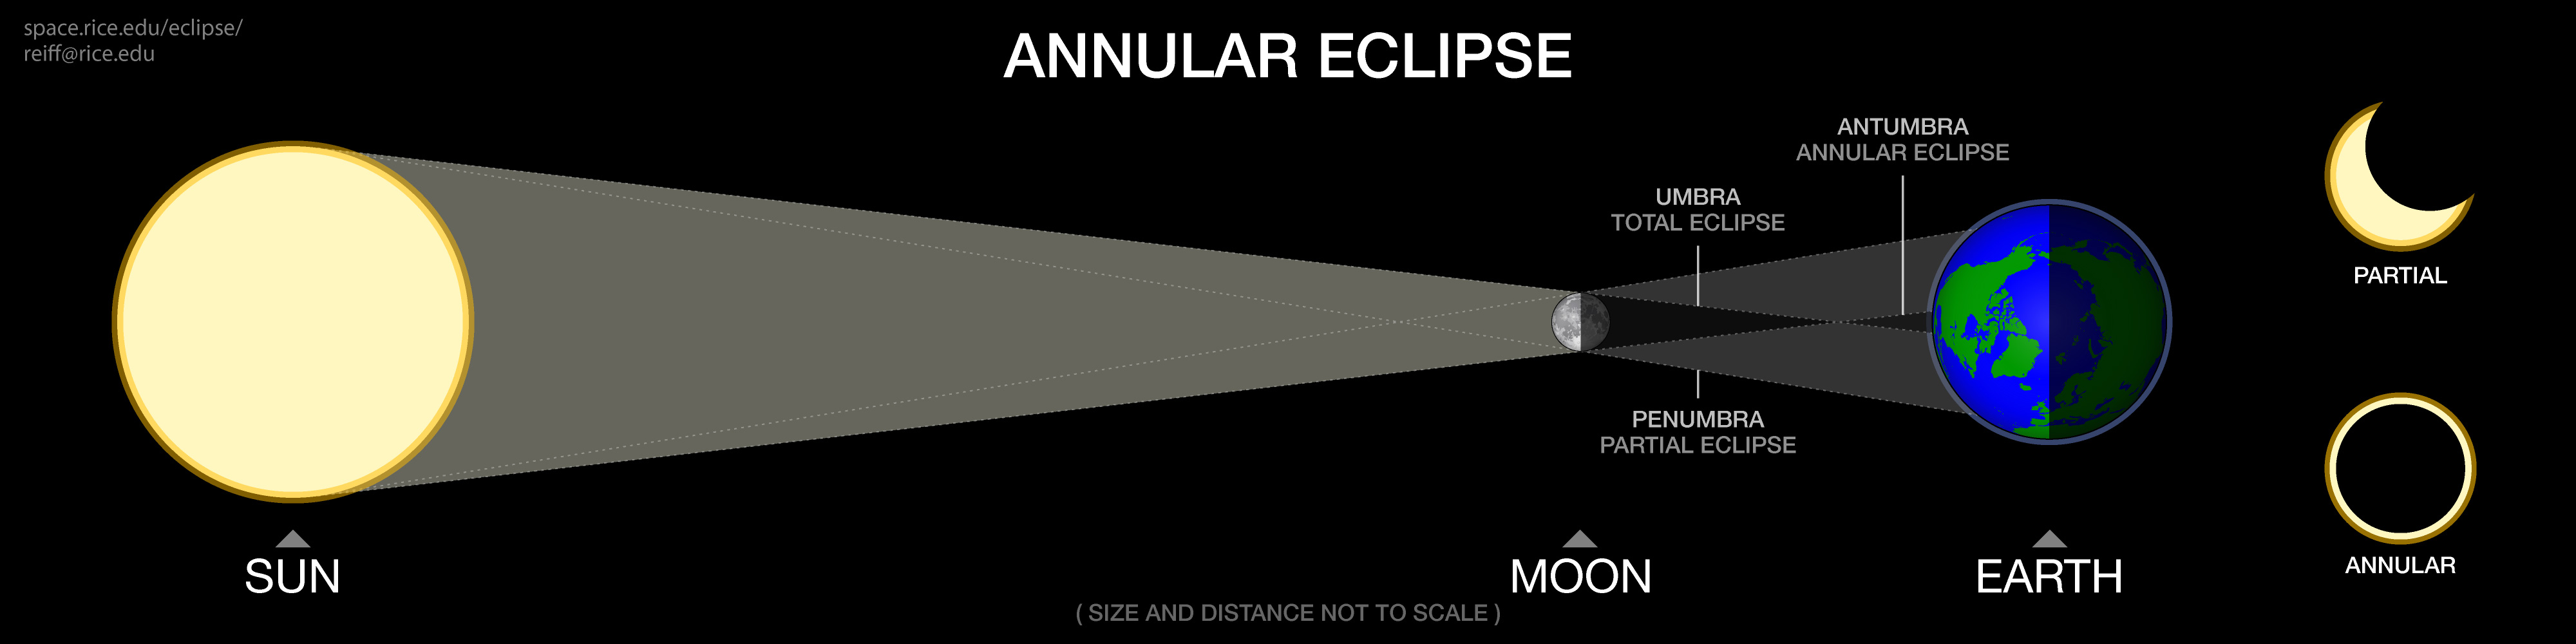 A diagram of an annular solar eclipse. The Sun is on the left, the Moon in the middle, and the Earth on the right. Because the Moon is far enough away from the Earth, the point at the tip of the umbra (the total eclipse shadow) is out in space, not on Earth's surface, meaning that the full Sun is never blocked when viewed from Earth. Areas of maximum eclipse see a bright ring of the Sun visible around the Moon.